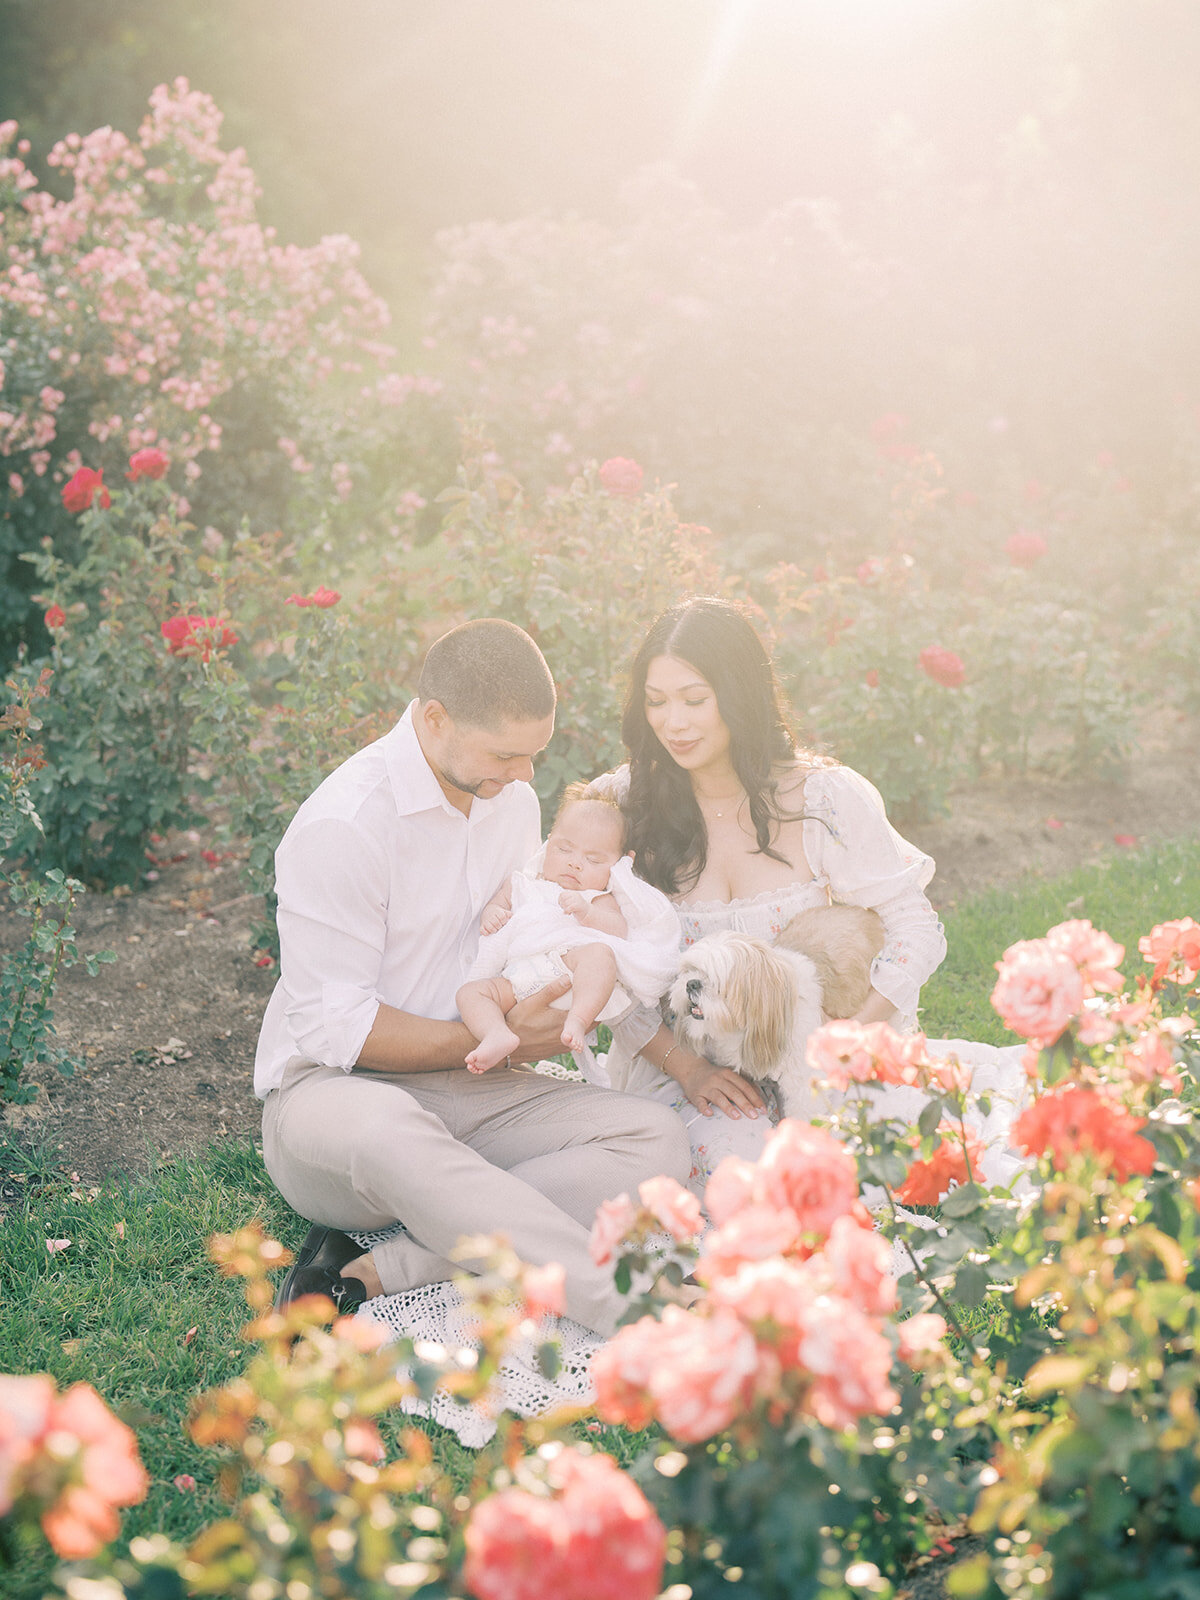 Dark-haired mother and father sit together in a rose garden holding their newborn baby girl and their small dog during sunset.